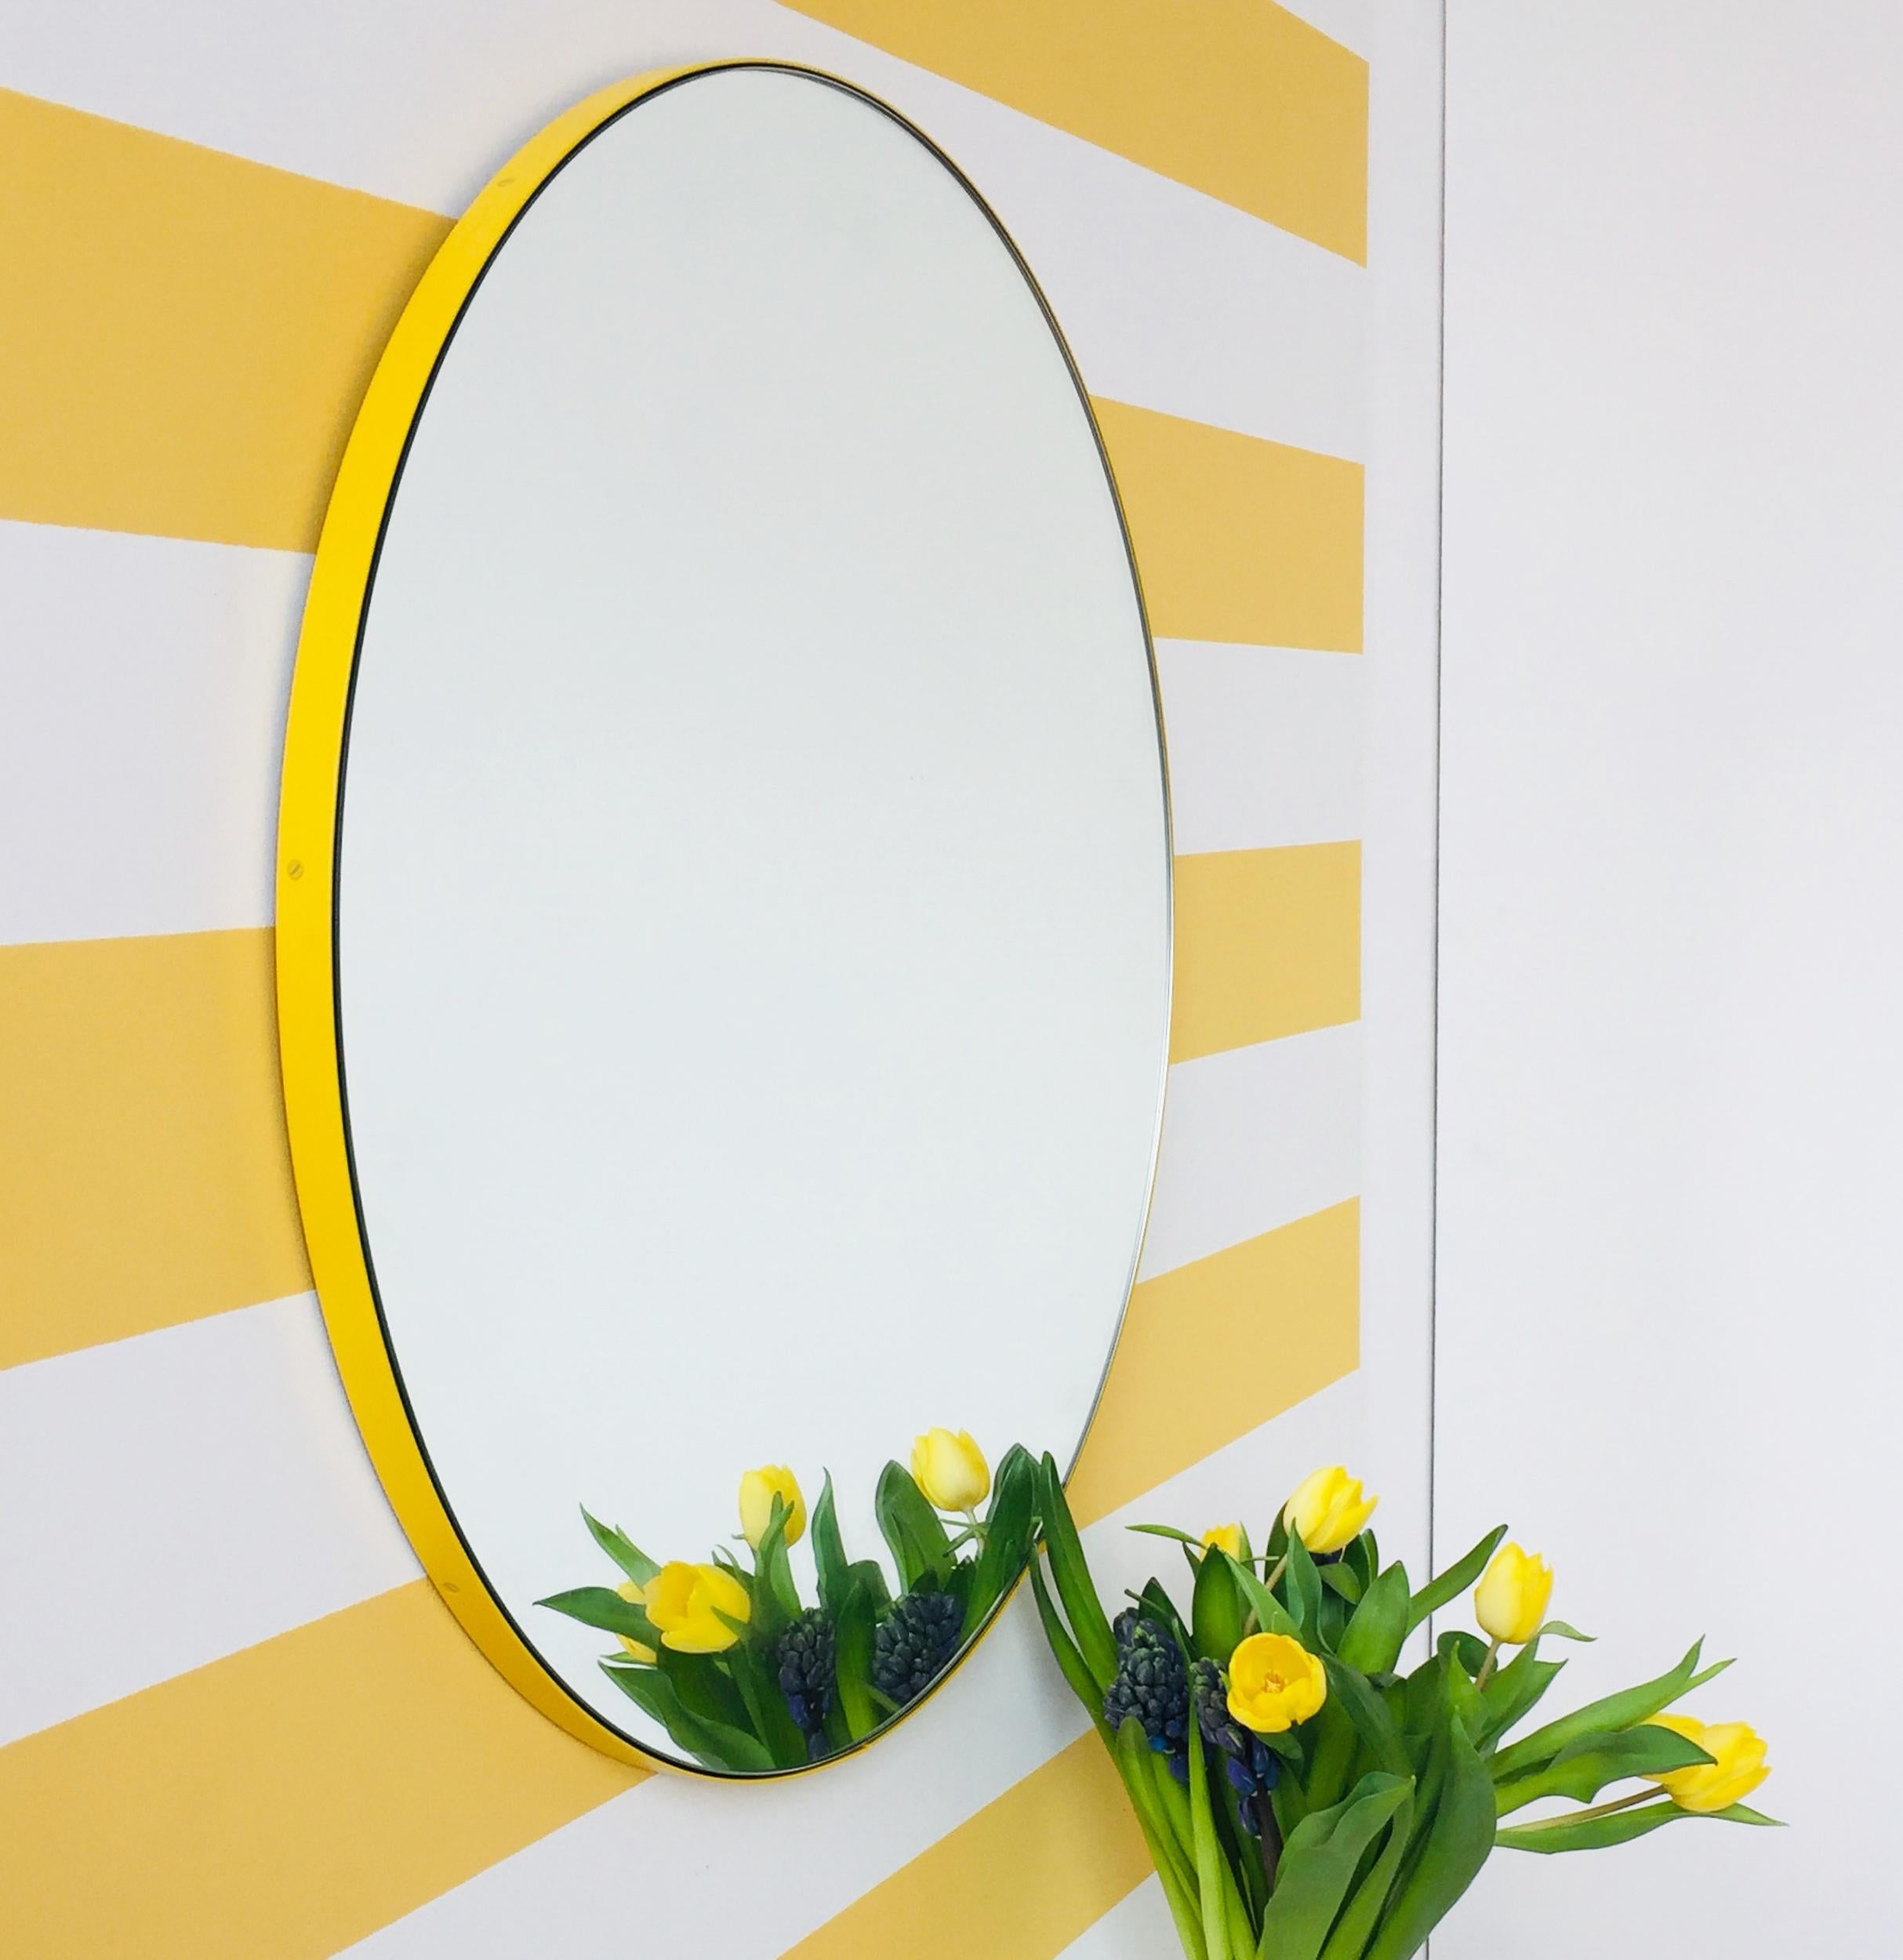 Orbis Round Mirror with Contemporary Yellow Frame, Regular In New Condition For Sale In London, GB